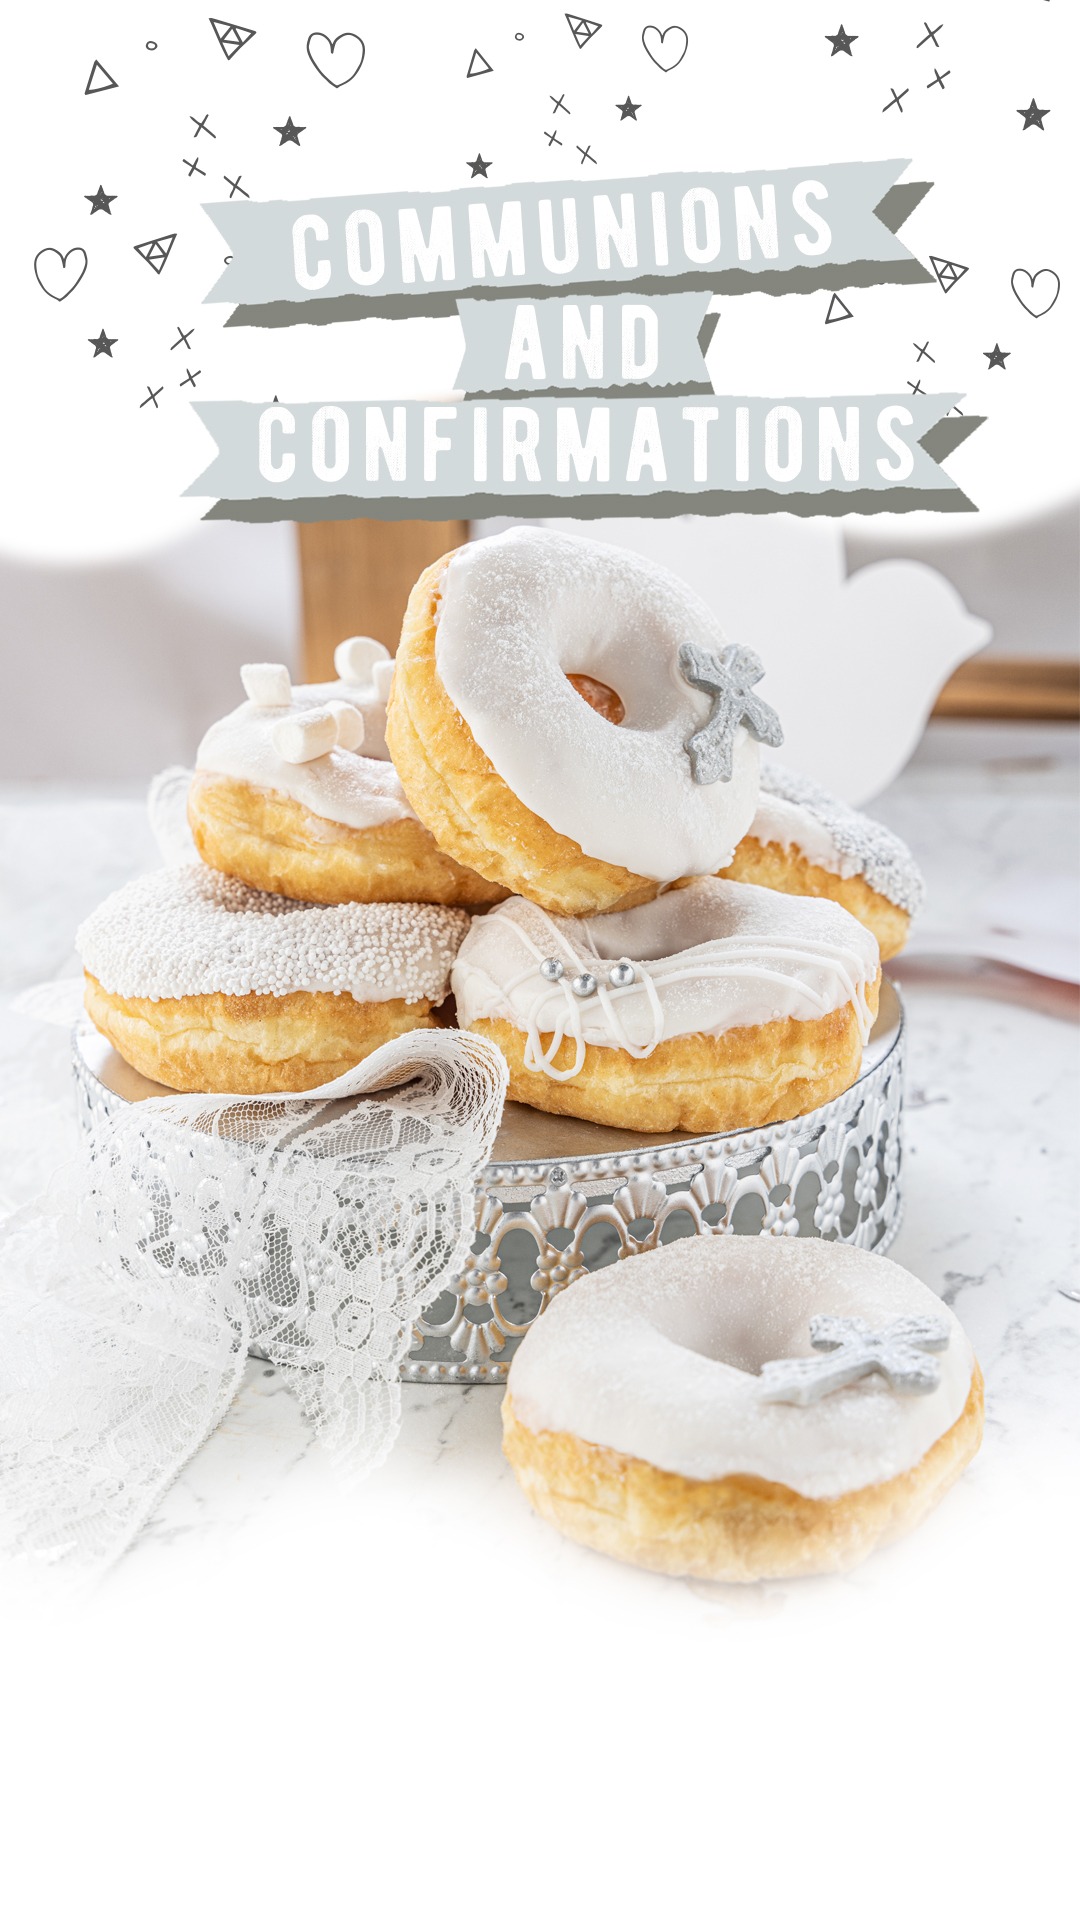 Communions confirmations themed donuts